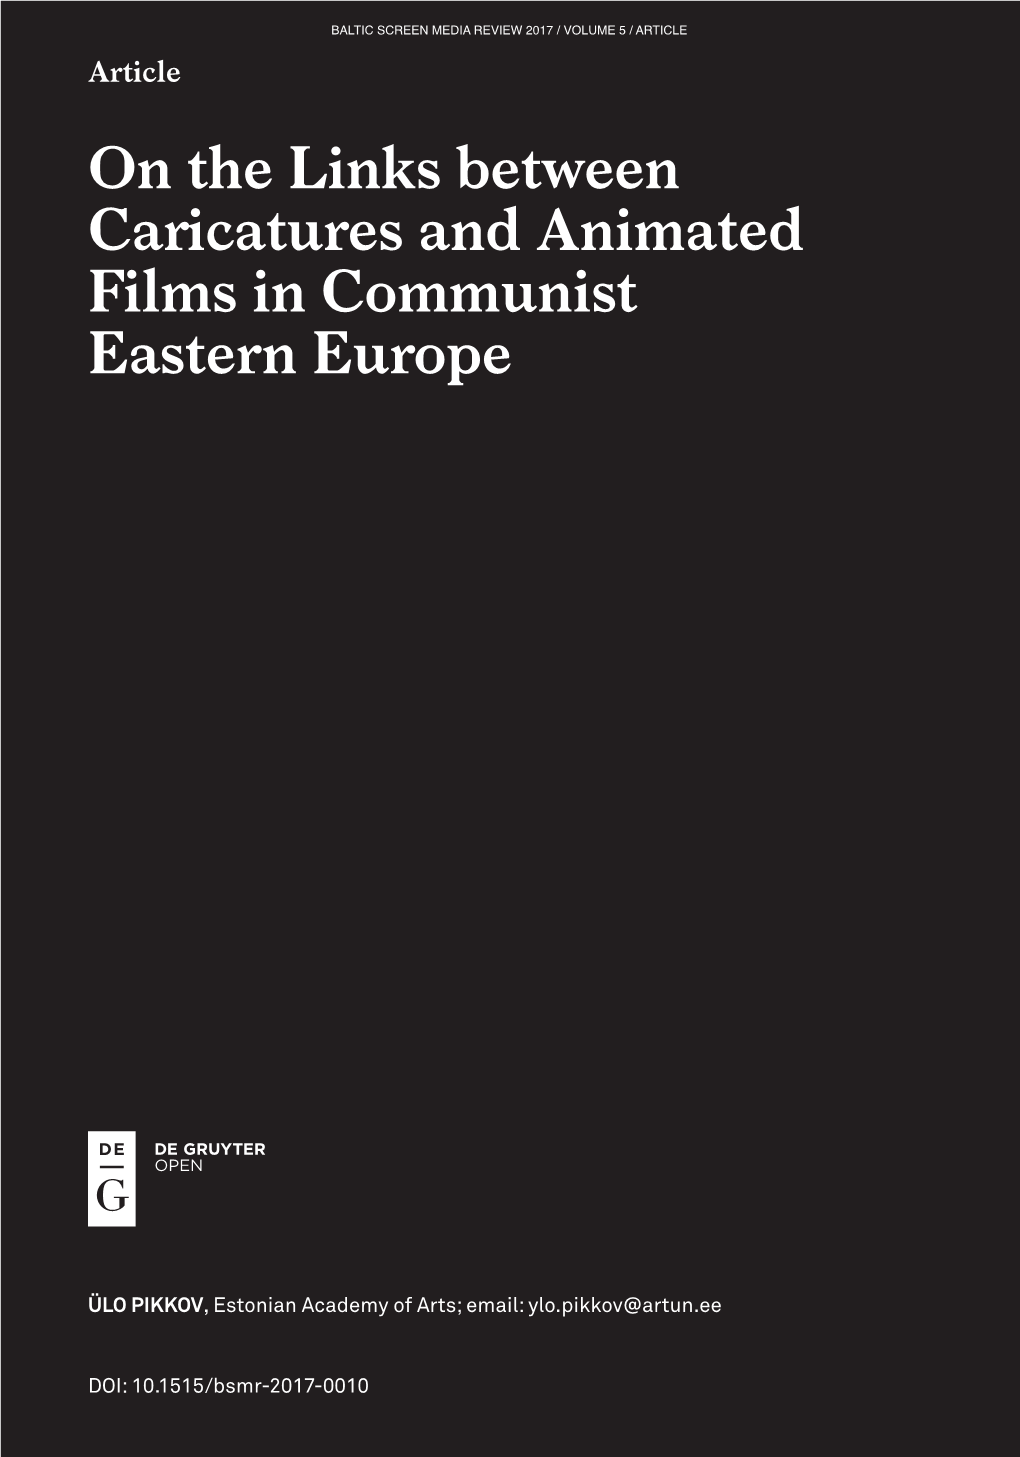 On the Links Between Caricatures and Animated Films in Communist Eastern Europe